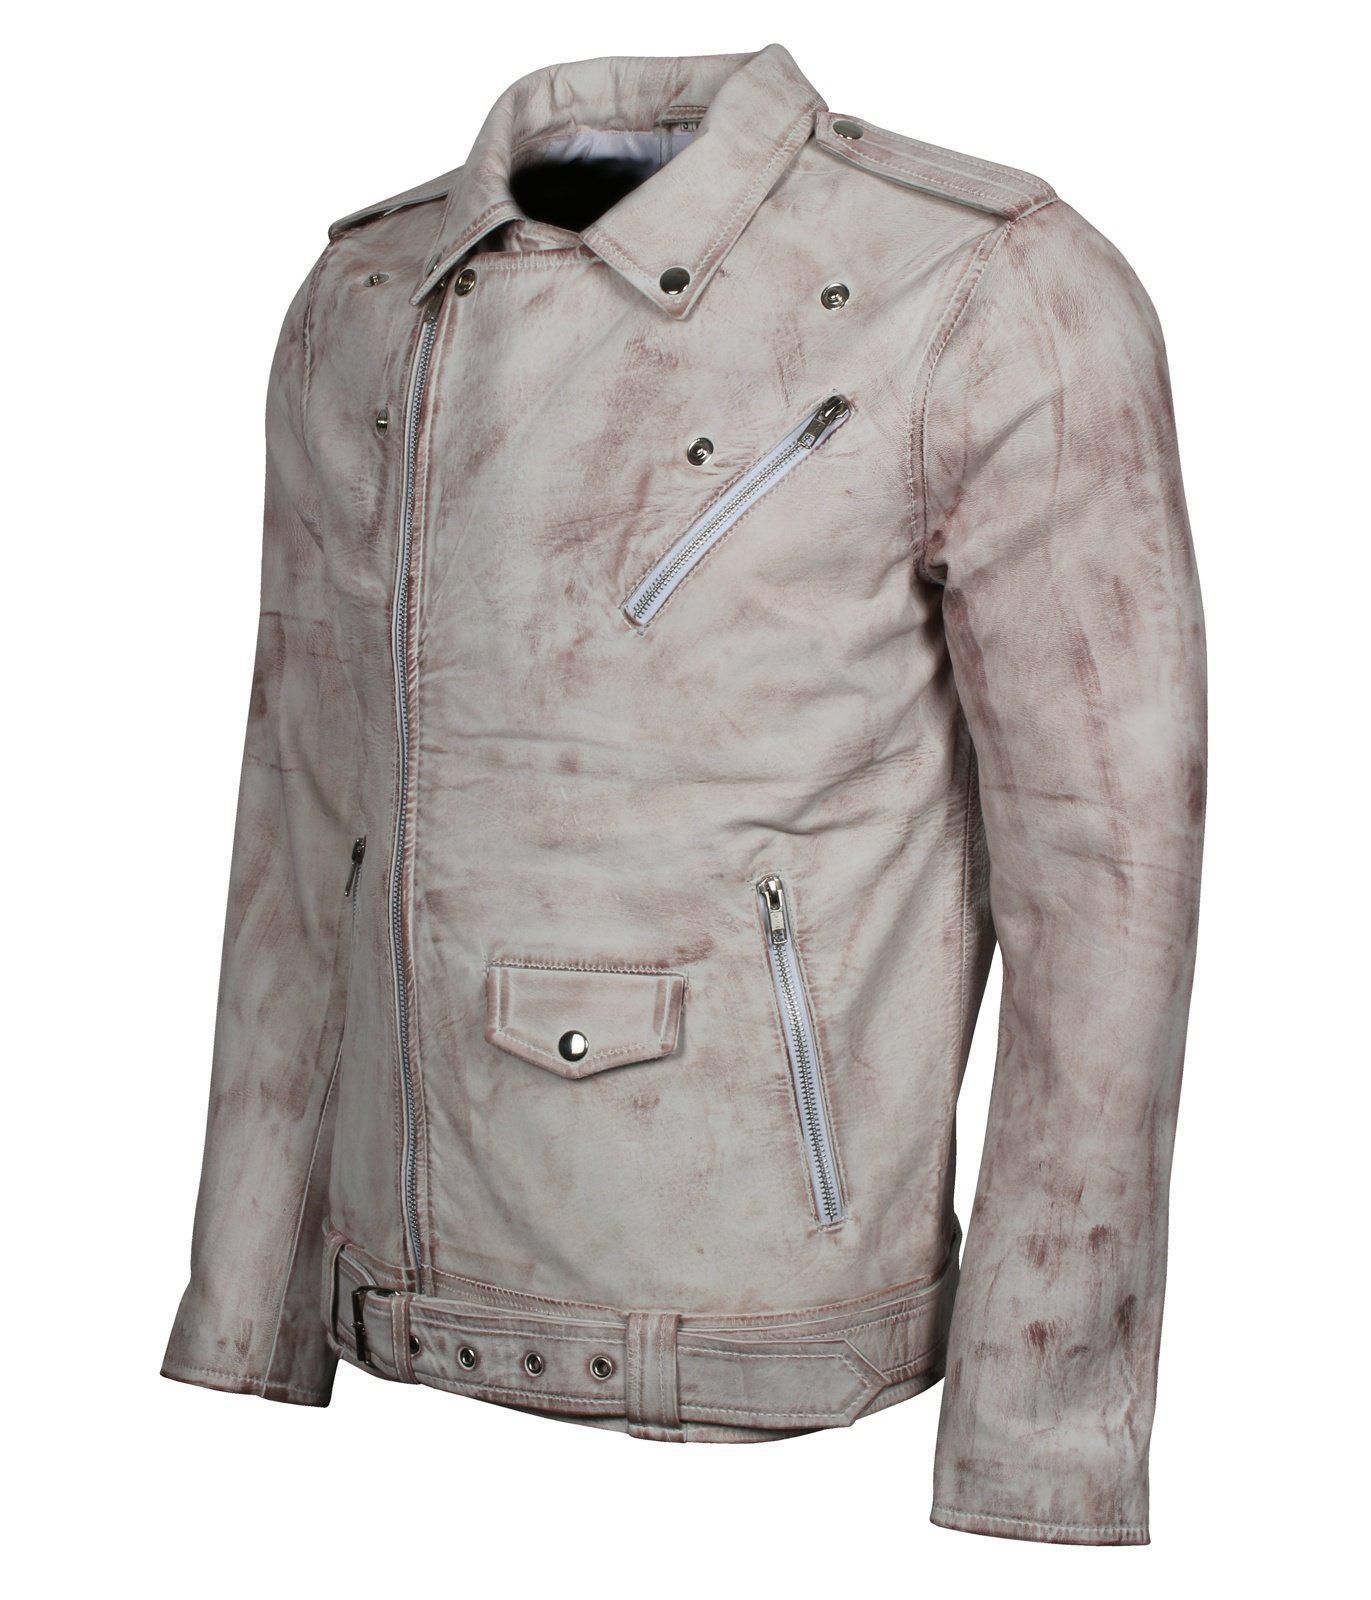 White Rocker Distressed Leather Belted Motorcycle Jacket | Alex Gear XL Chest 45-46 Inches / White